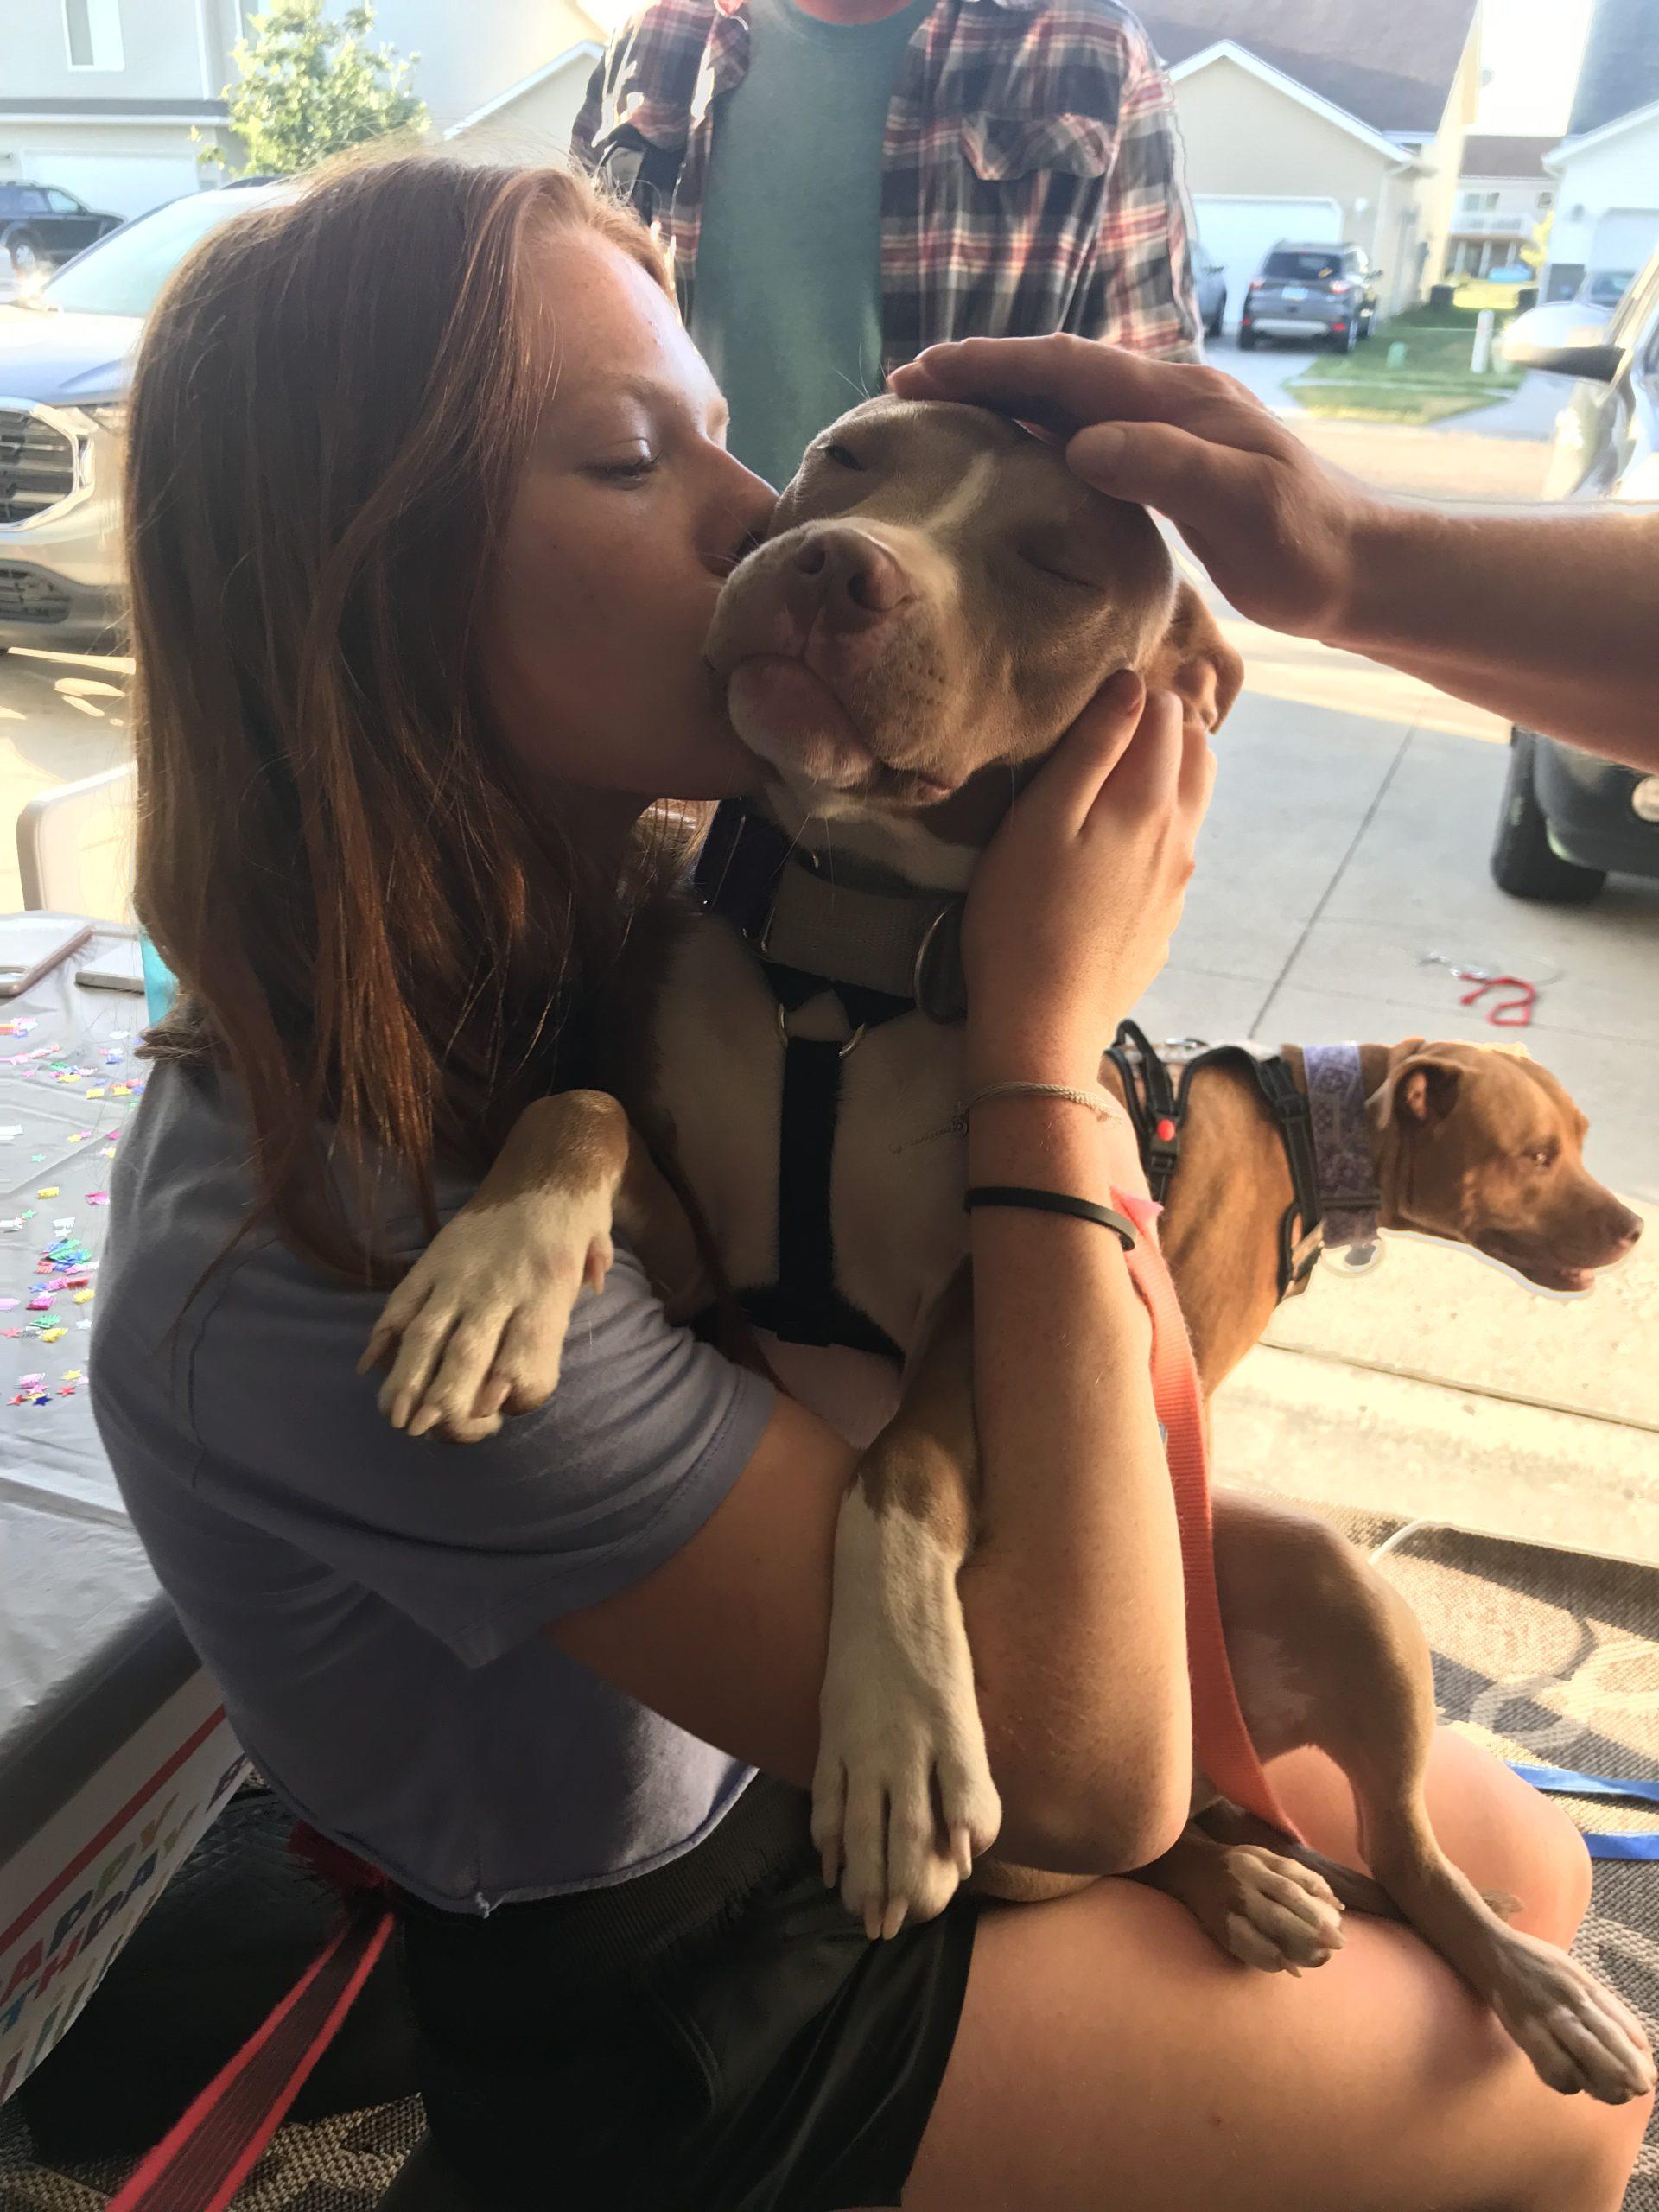 A woman kisses a small pitbull on the cheek while another person pats its head.